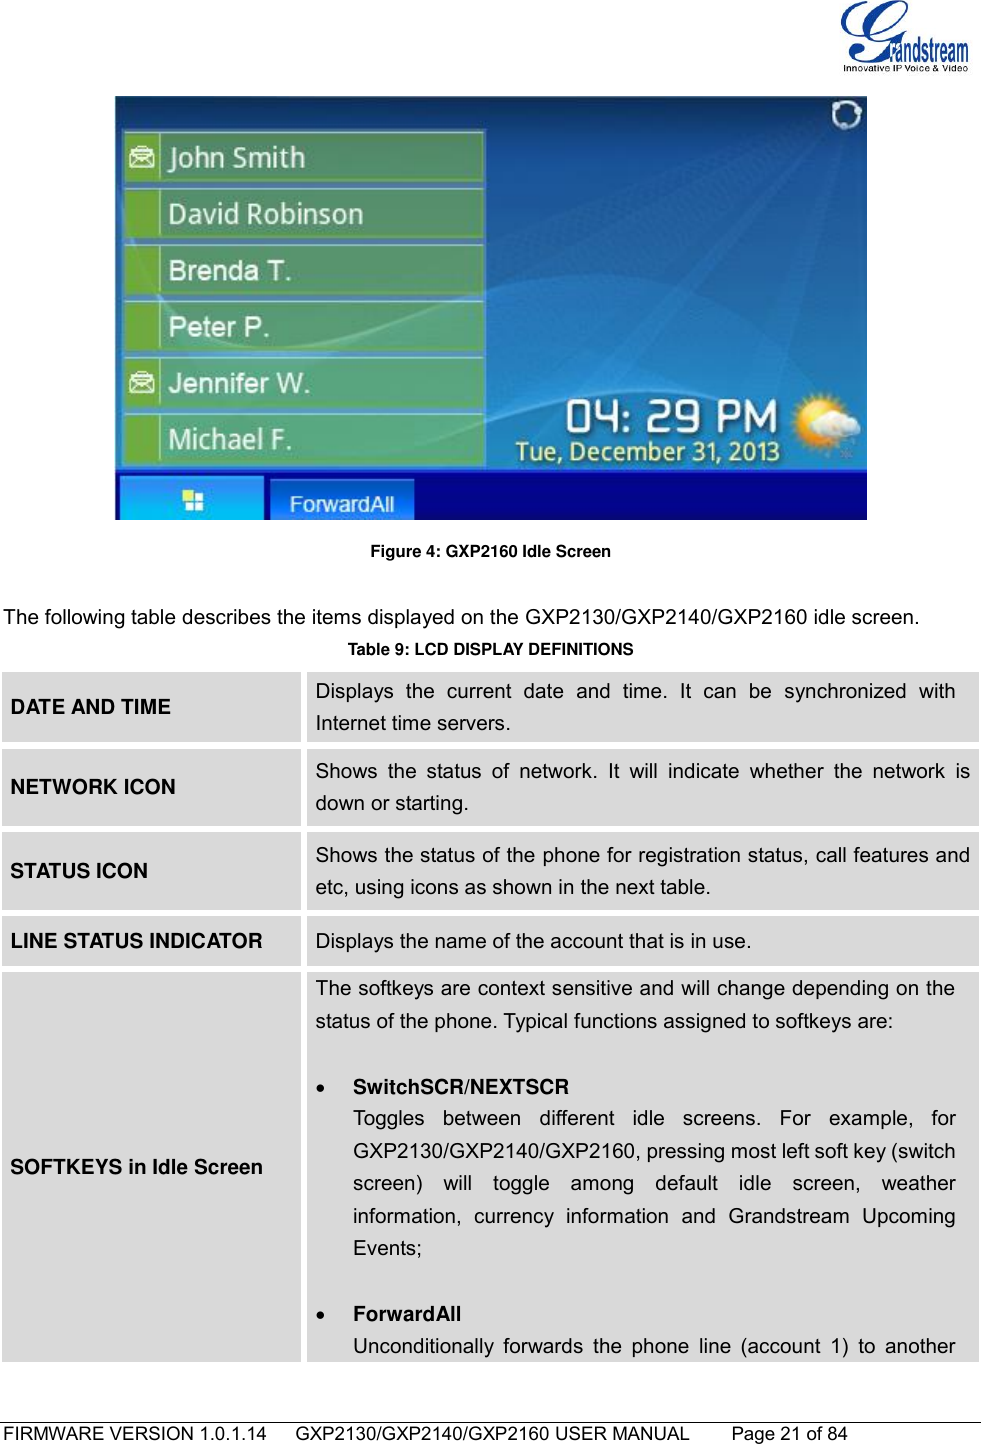   FIRMWARE VERSION 1.0.1.14      GXP2130/GXP2140/GXP2160 USER MANUAL     Page 21 of 84                                    Figure 4: GXP2160 Idle Screen  The following table describes the items displayed on the GXP2130/GXP2140/GXP2160 idle screen. Table 9: LCD DISPLAY DEFINITIONS DATE AND TIME Displays  the  current  date  and  time.  It  can  be  synchronized  with Internet time servers. NETWORK ICON Shows  the  status  of  network.  It  will  indicate  whether  the  network  is down or starting. STATUS ICON Shows the status of the phone for registration status, call features and etc, using icons as shown in the next table. LINE STATUS INDICATOR Displays the name of the account that is in use. SOFTKEYS in Idle Screen The softkeys are context sensitive and will change depending on the status of the phone. Typical functions assigned to softkeys are:   SwitchSCR/NEXTSCR Toggles  between different  idle  screens.  For  example,  for GXP2130/GXP2140/GXP2160, pressing most left soft key (switch screen)  will  toggle  among  default  idle  screen,  weather information,  currency  information  and  Grandstream  Upcoming Events;   ForwardAll   Unconditionally forwards  the  phone  line  (account  1)  to  another 